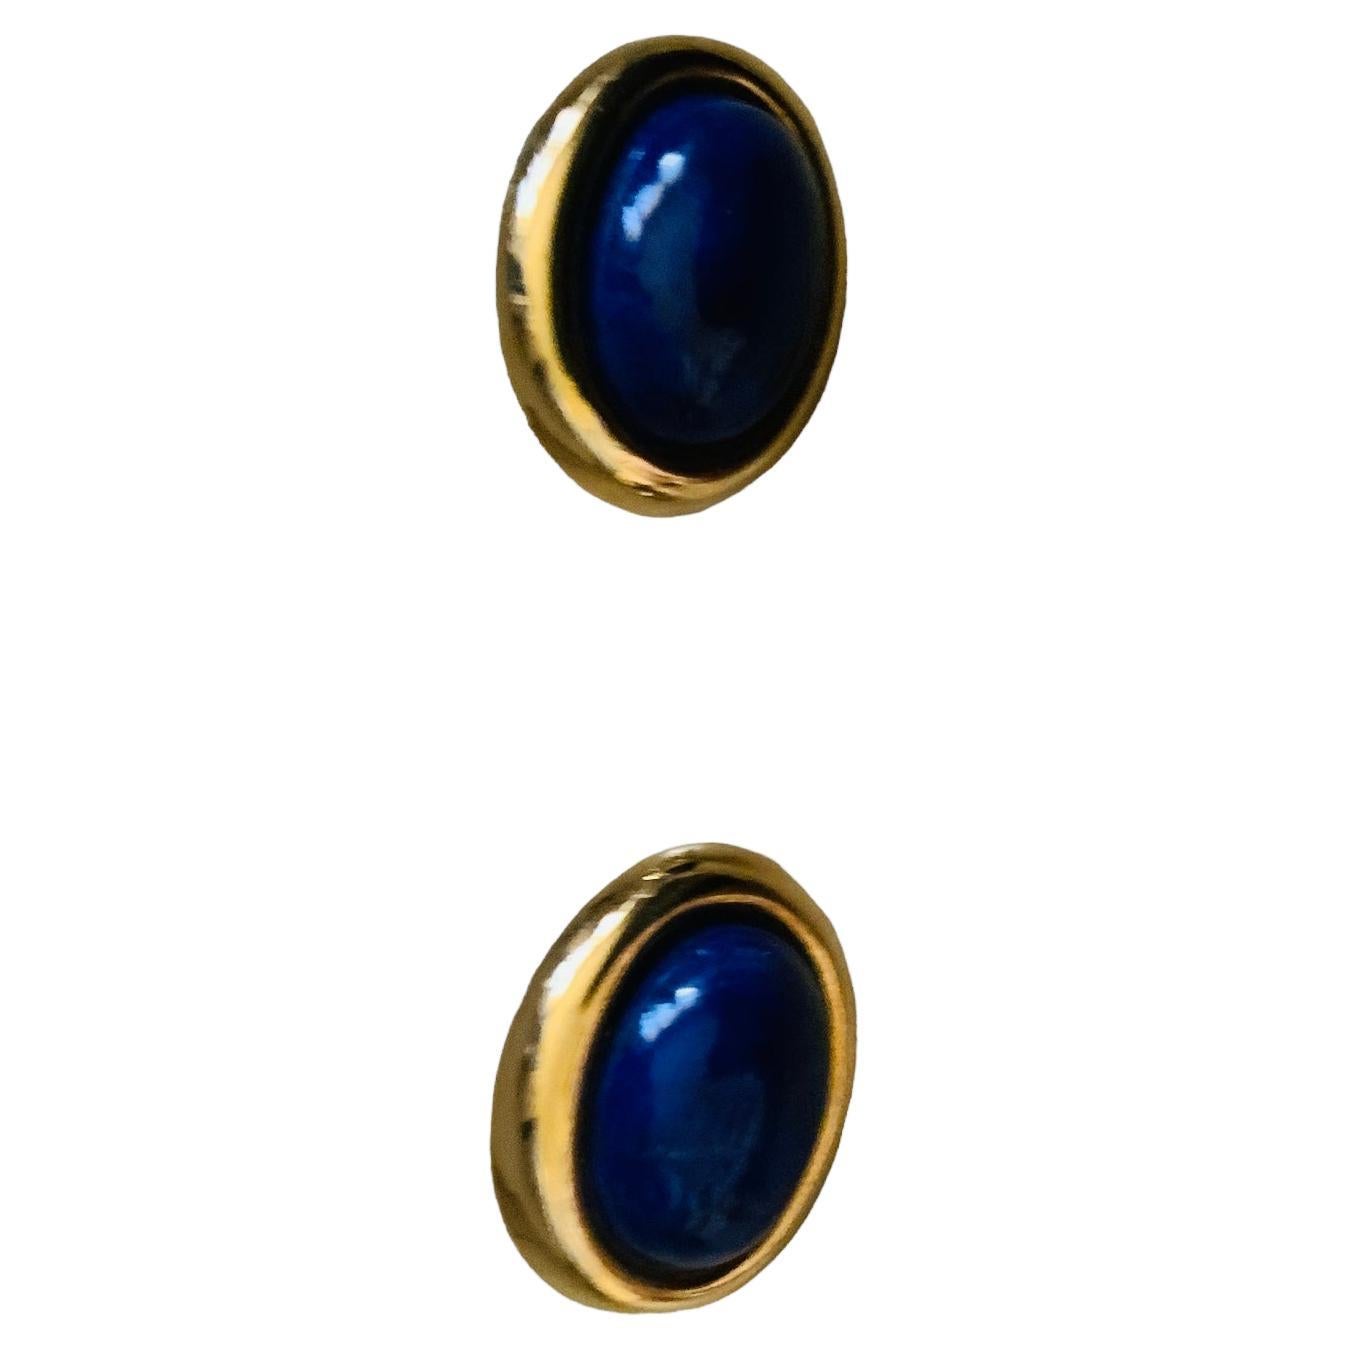 This is 14K Yellow Gold and Lapis lazuli Pair of Earrings. It depicts an oval shaped cabochon Lapis lazuli stones mounted in a 14K gold bezel setting oval halo. They are hallmarked 14k in the back.